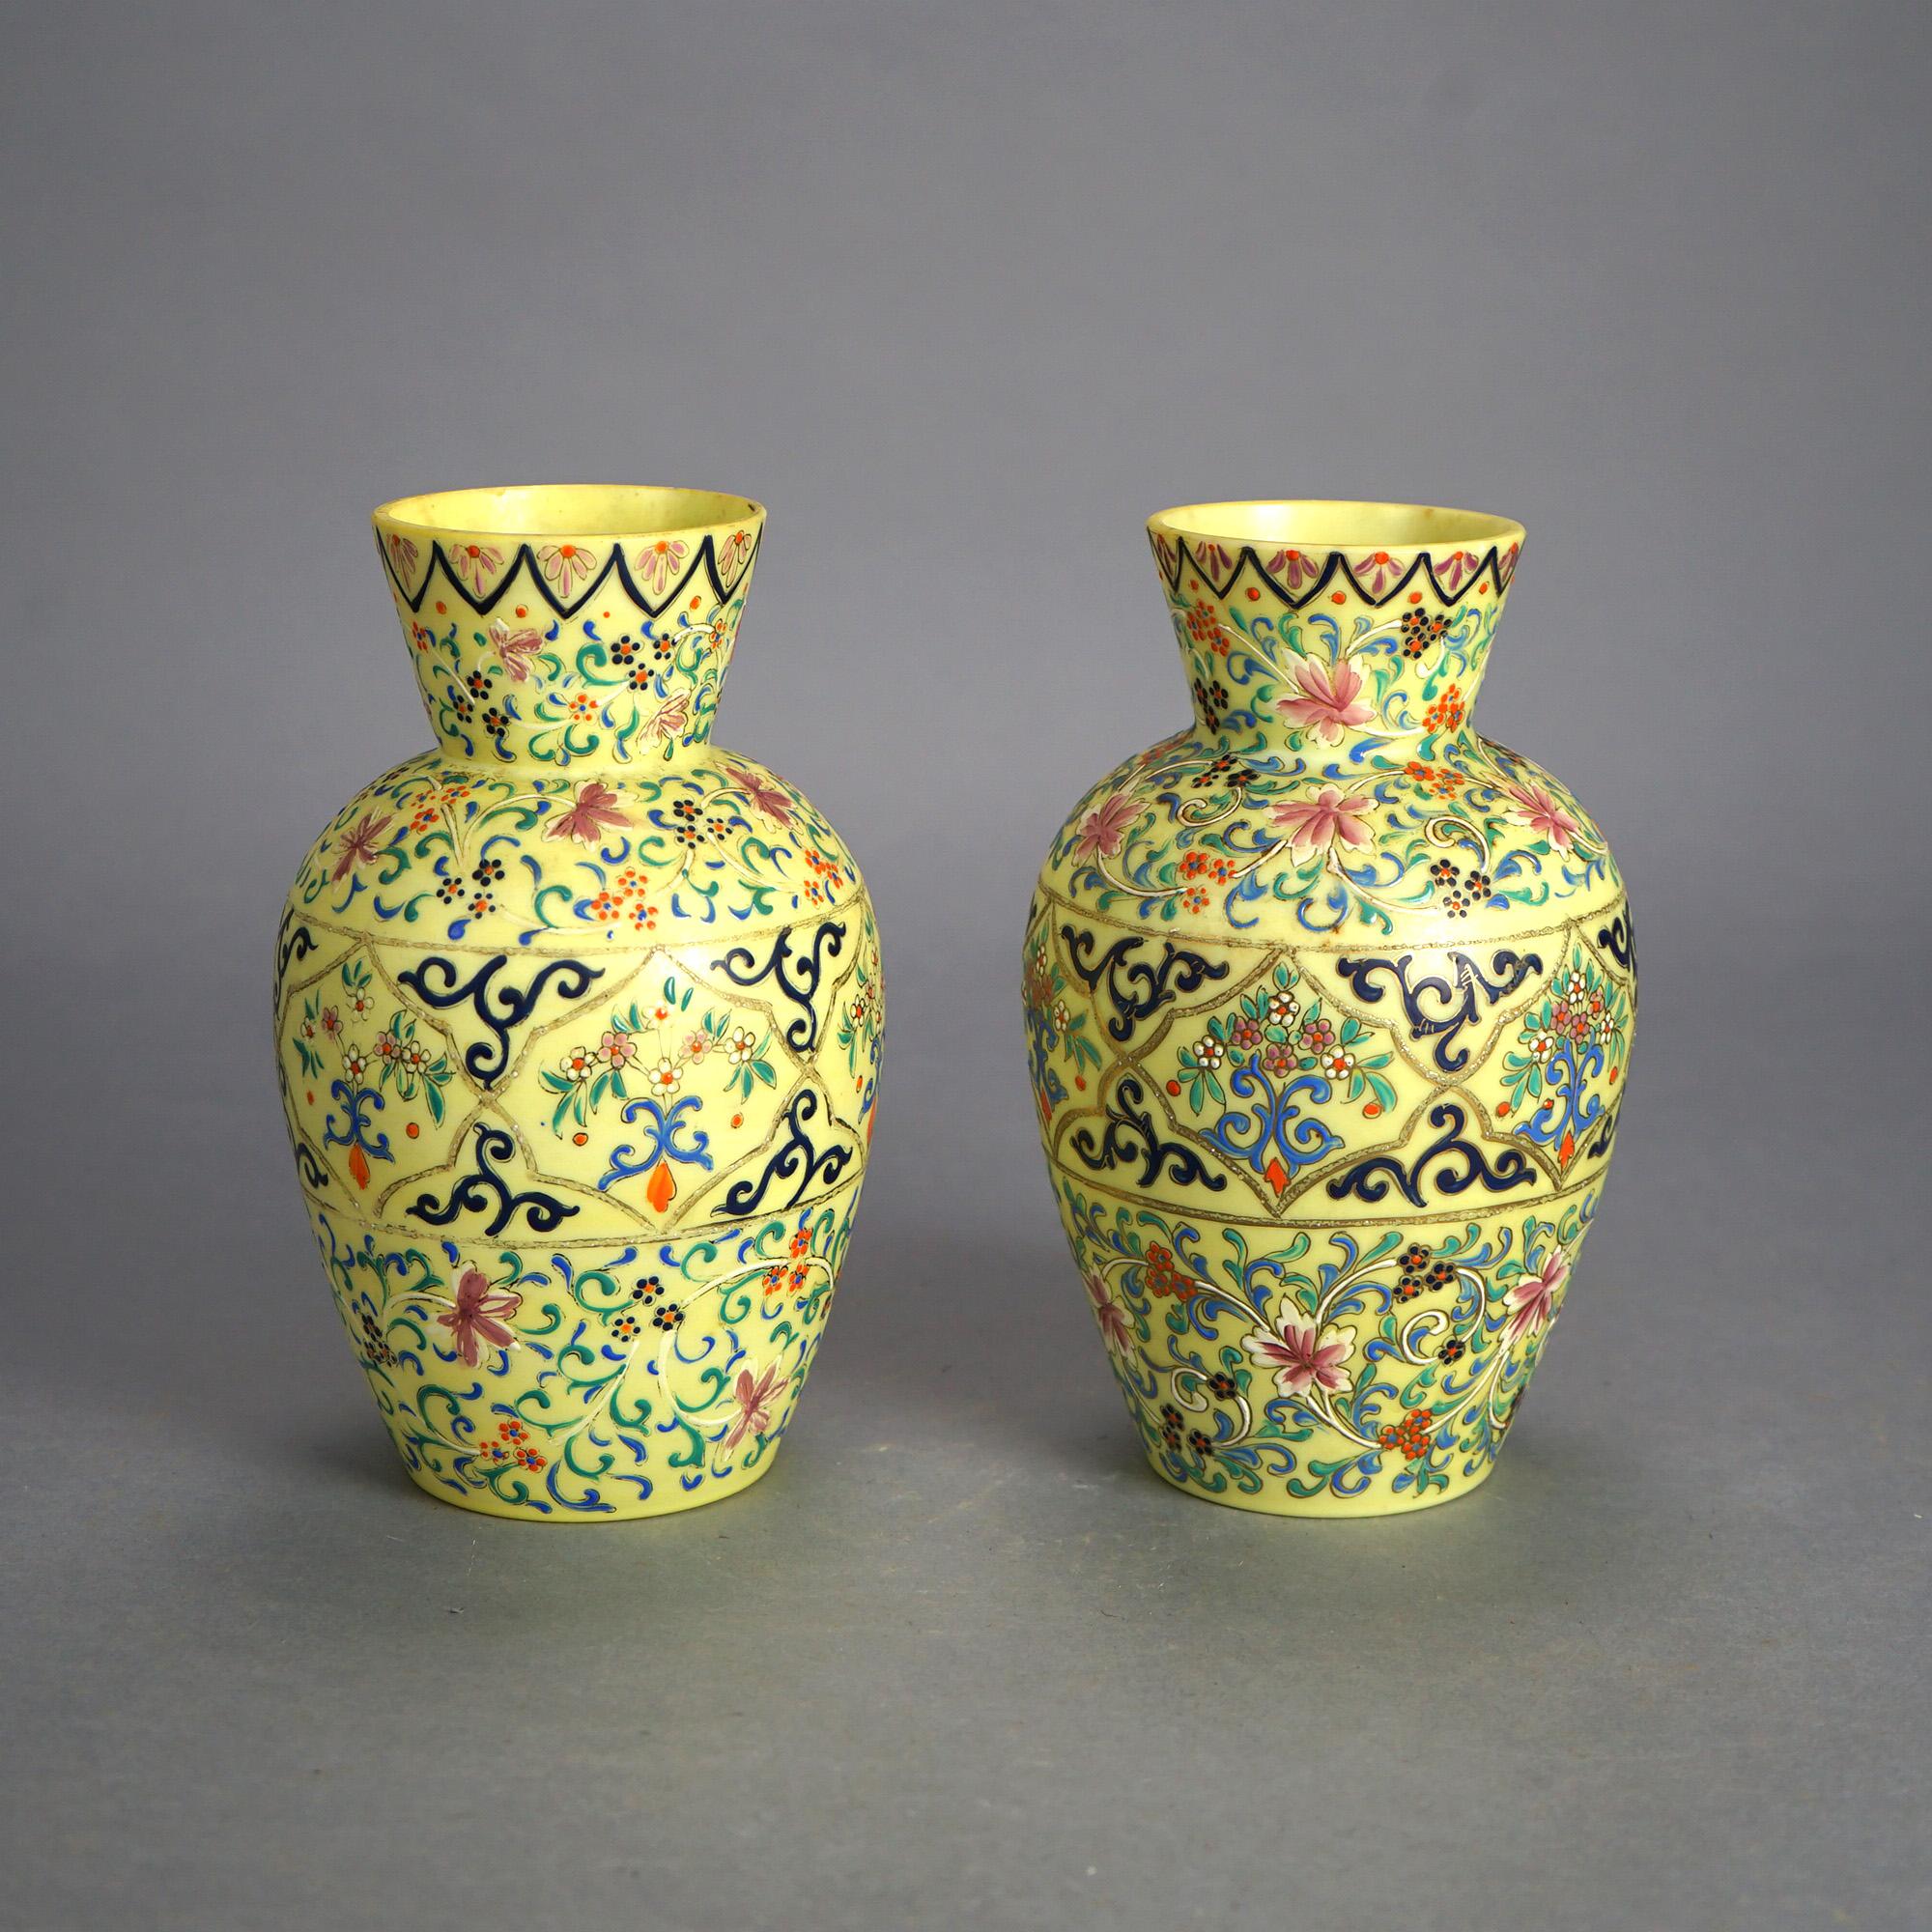 Antique Pair Opaline Enamel Decorated Art Glass Vases with Floral & Scroll C1900 For Sale 5